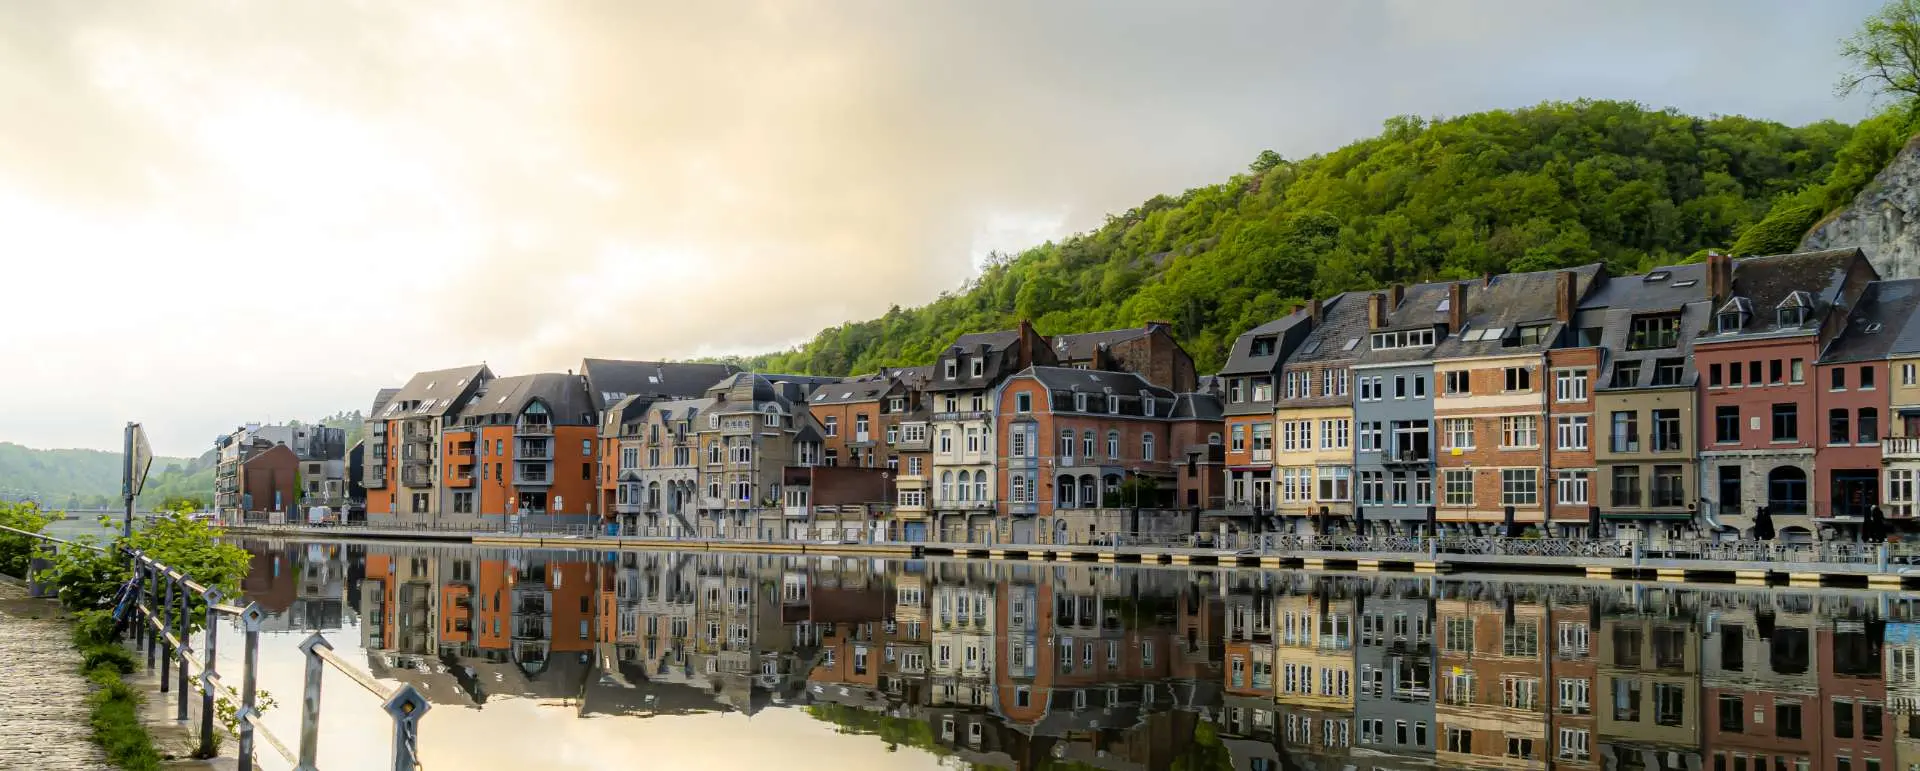 Ardennes - the destination for bus trips